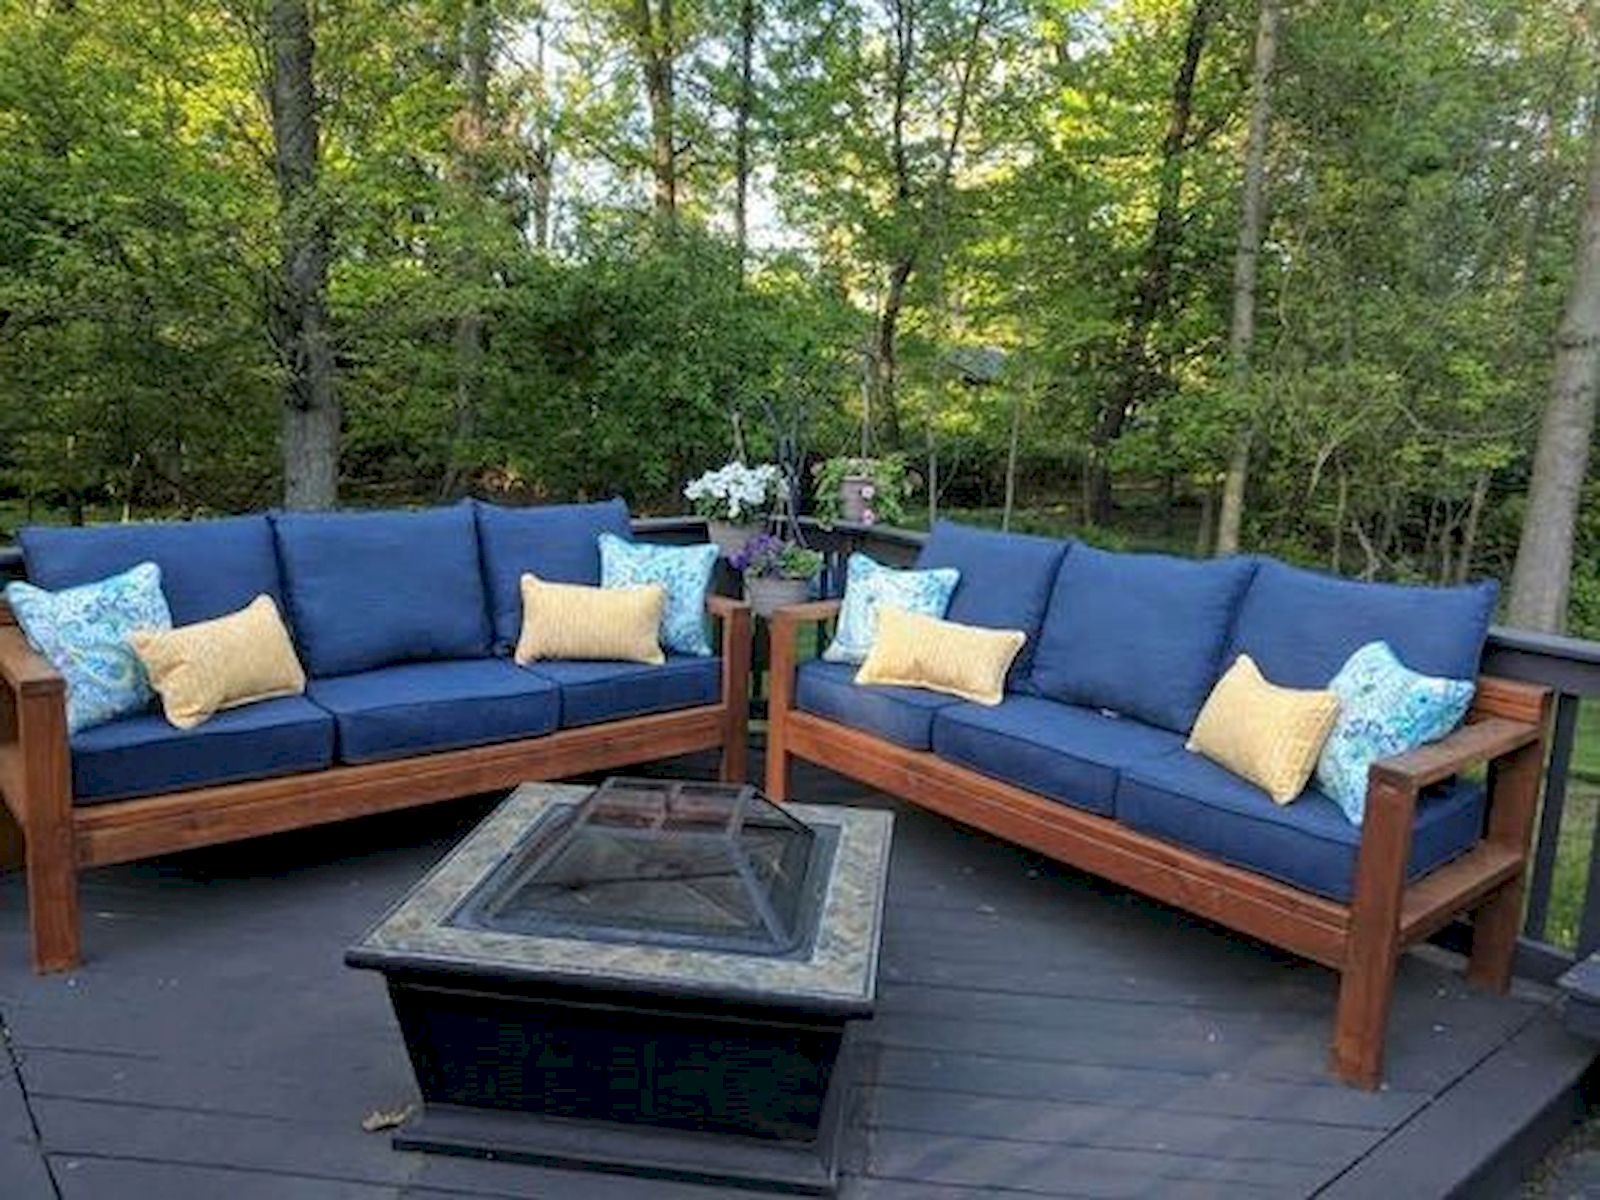 50 Amazing DIY Projects Outdoor Furniture Design Ideas (2)